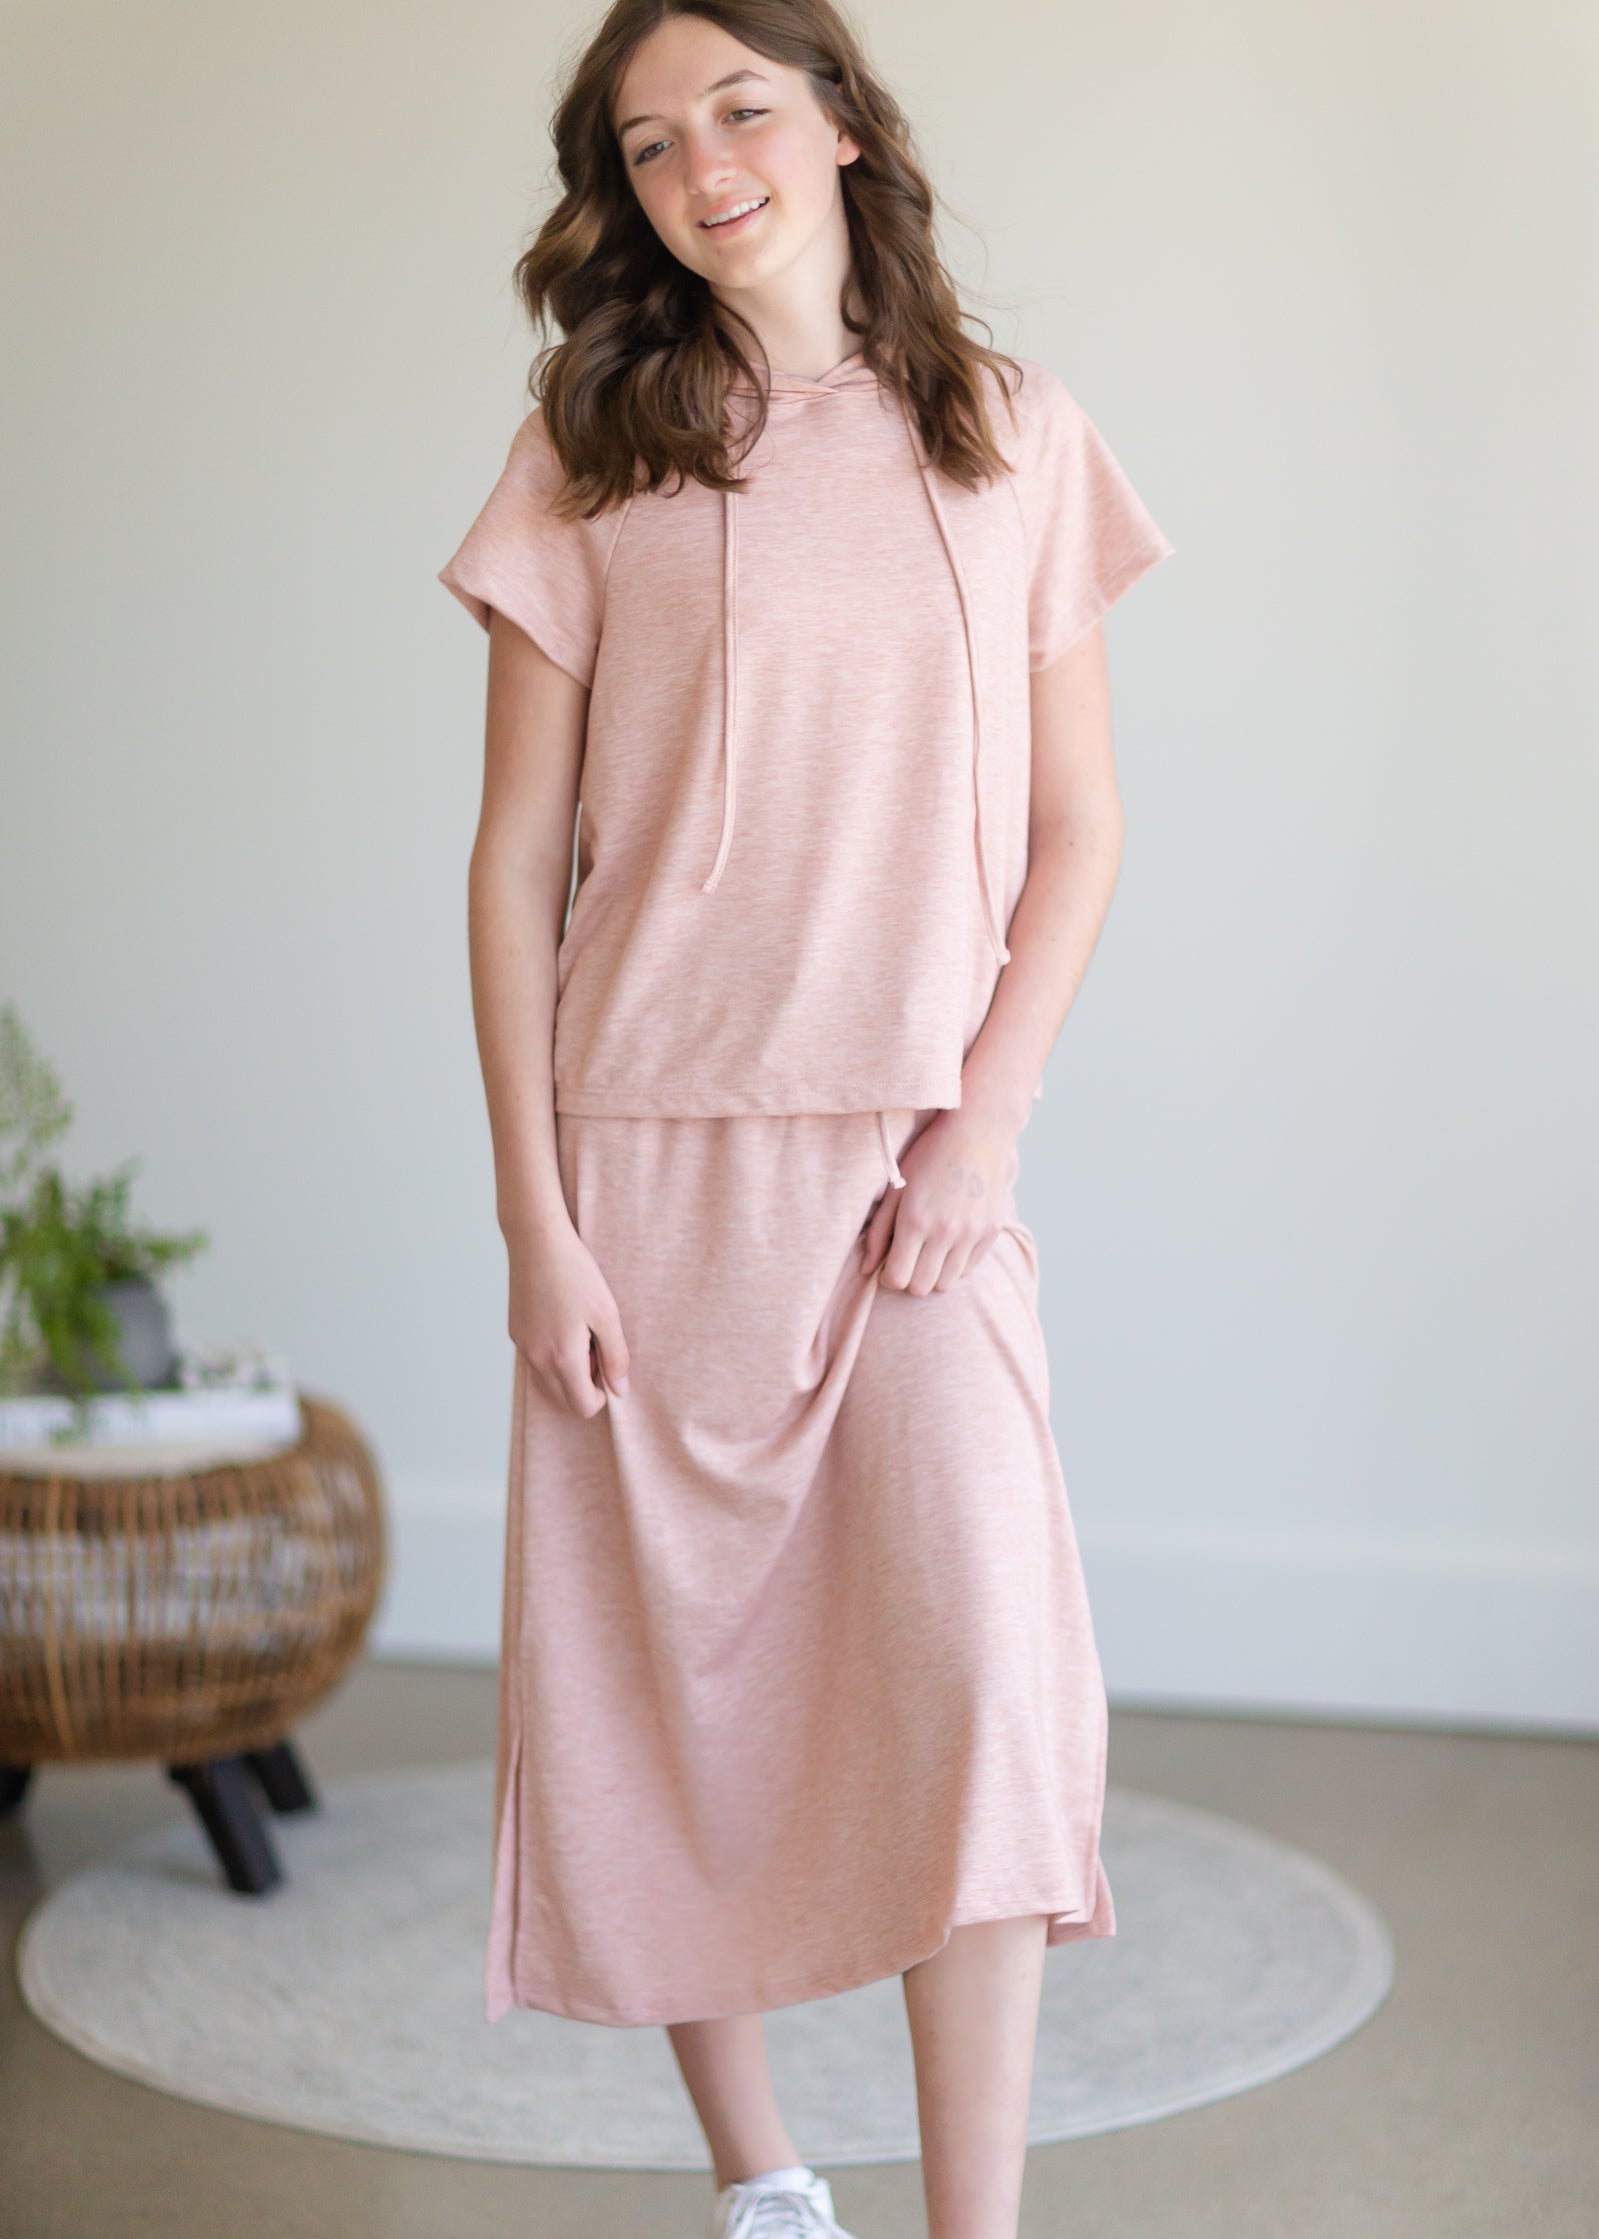 Rose French Terry Knit Skirt - FINAL SALE Skirts